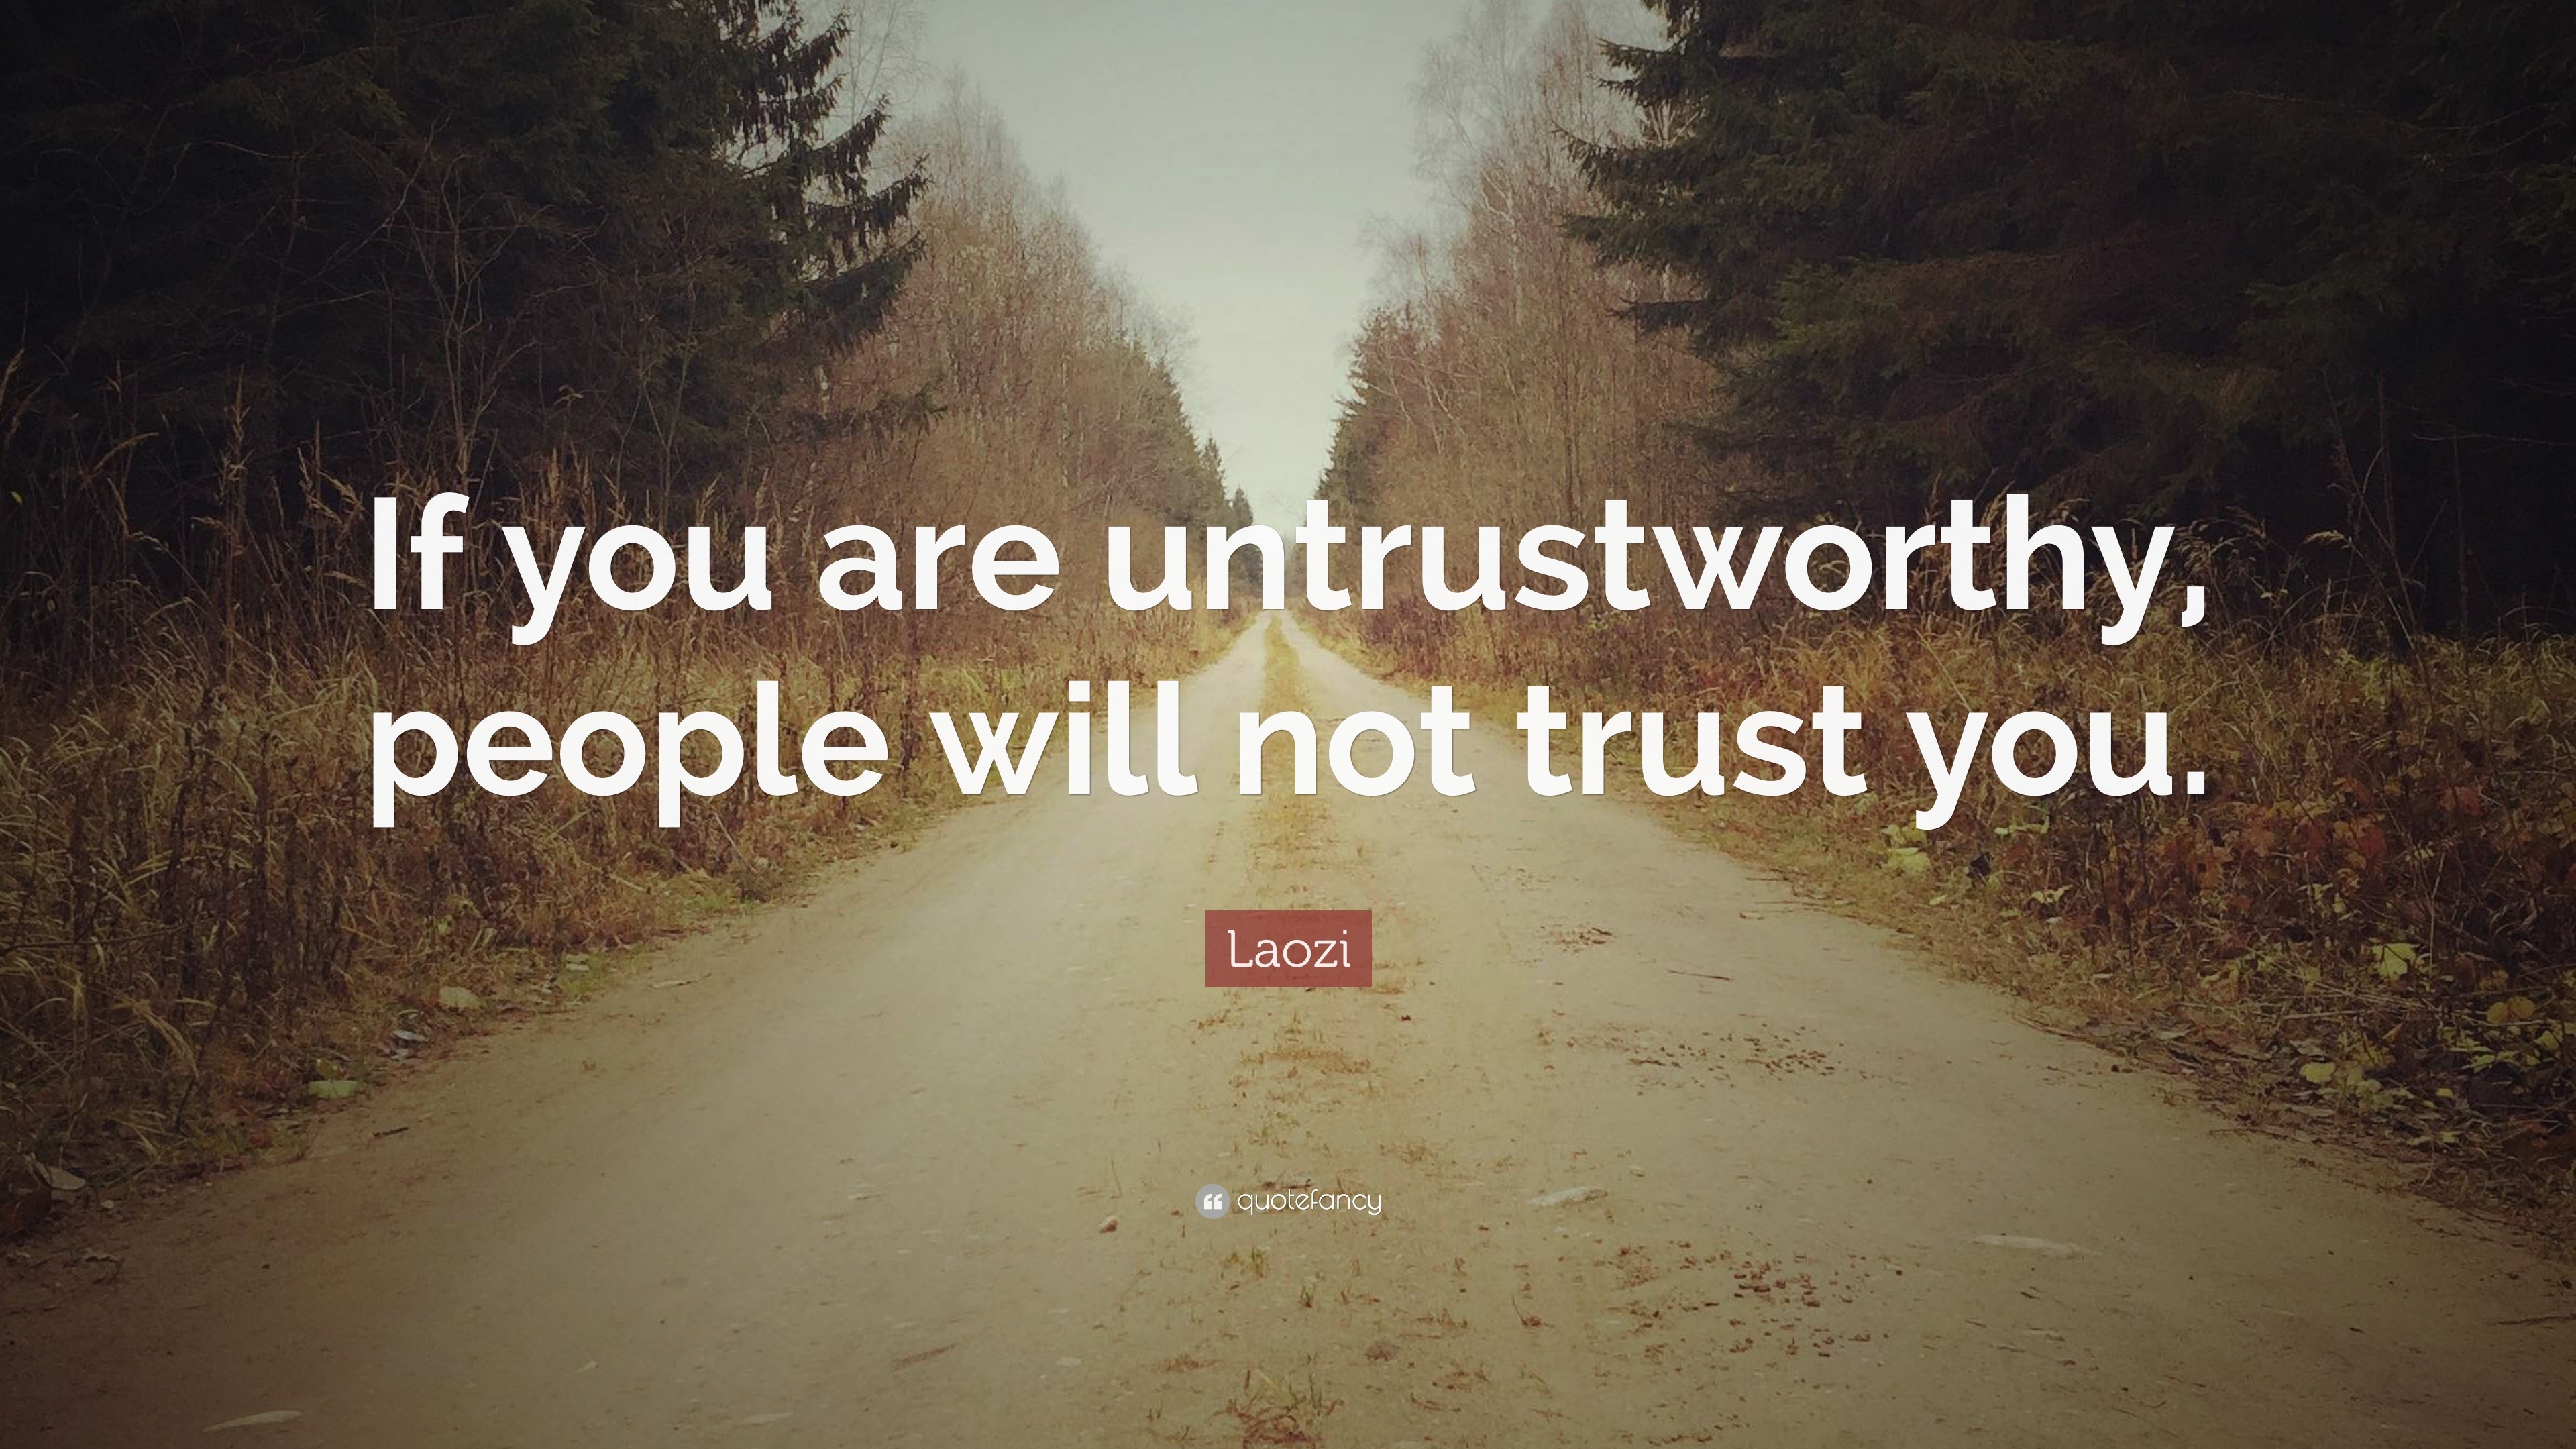 Laozi Quote: “If you are untrustworthy, people will not trust you.” (10 ...